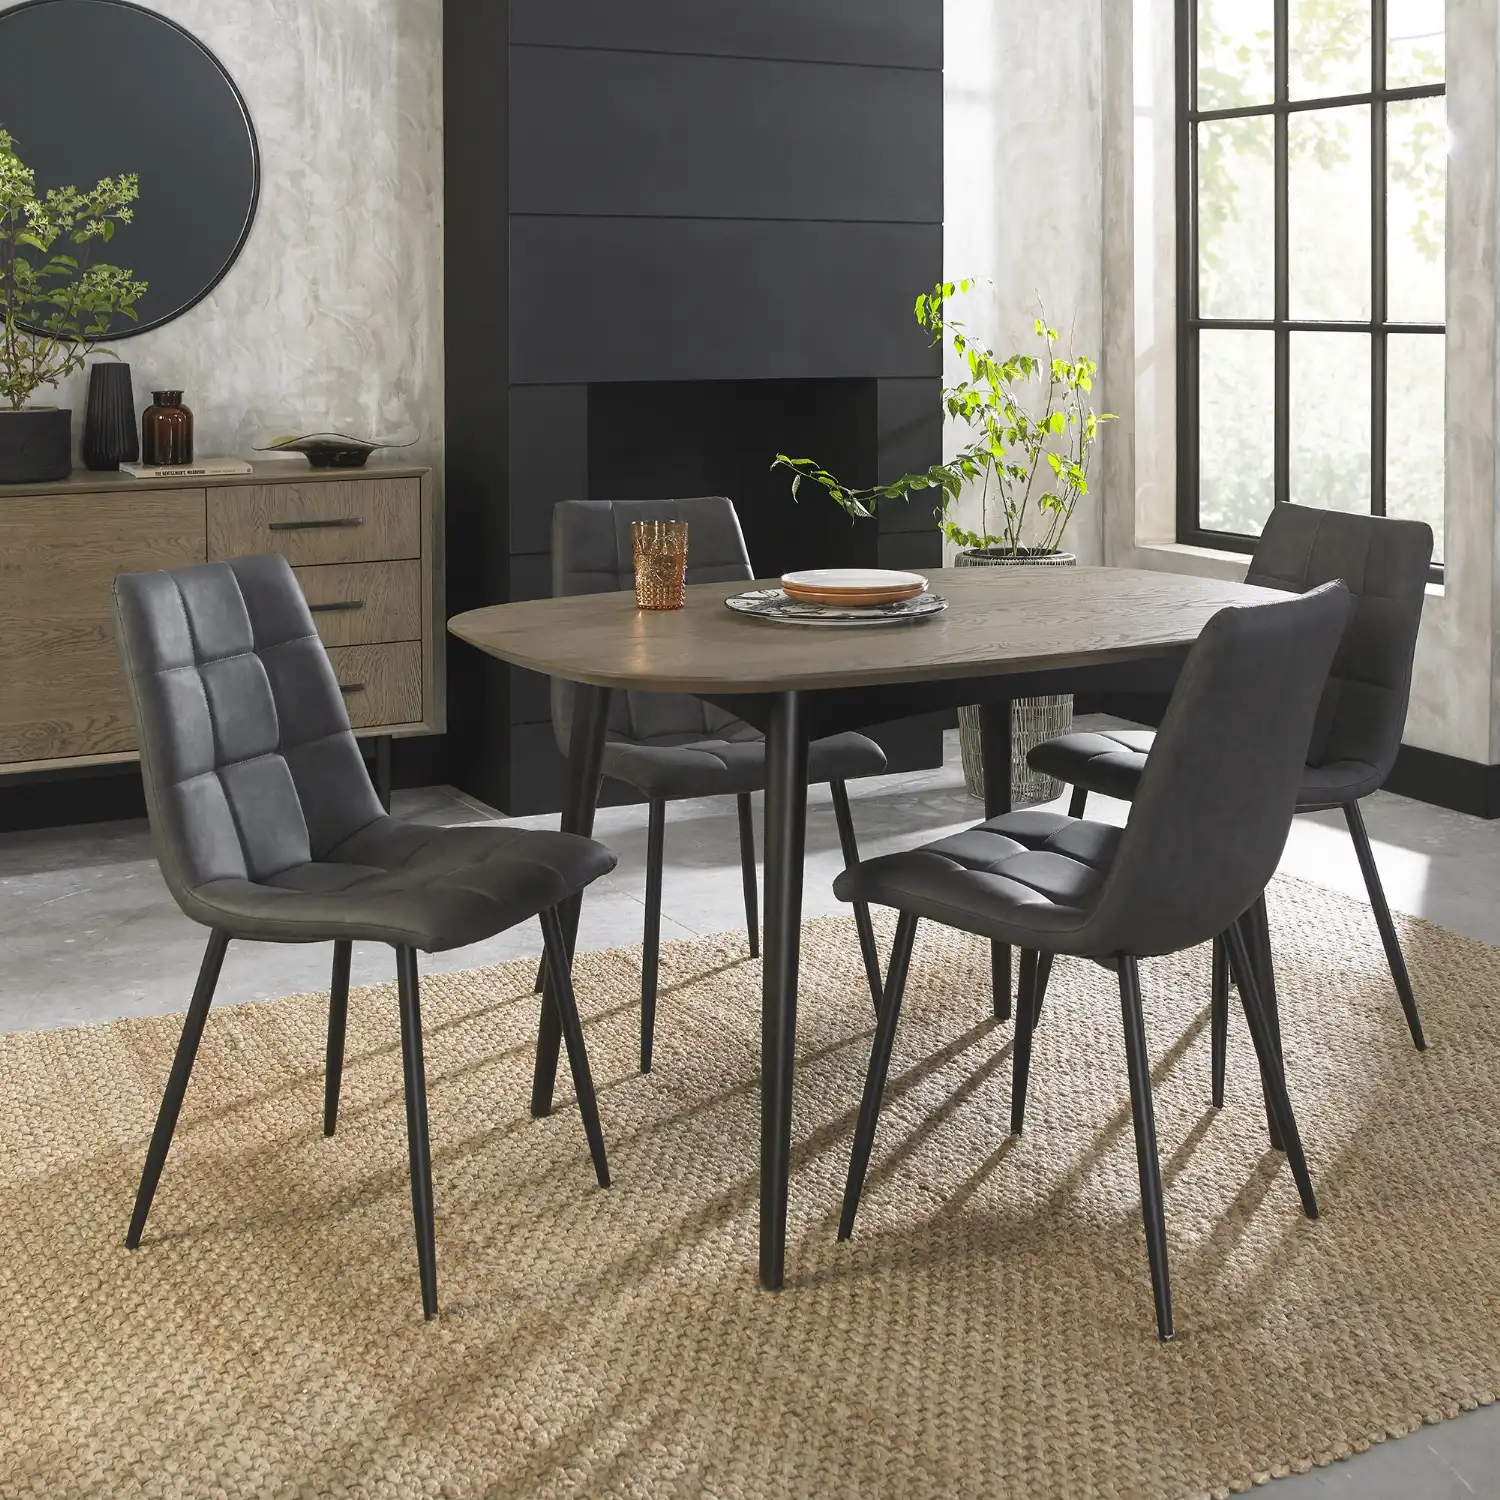 Weathered Oak Table 4 Dark Grey Leather Chairs Dining Set